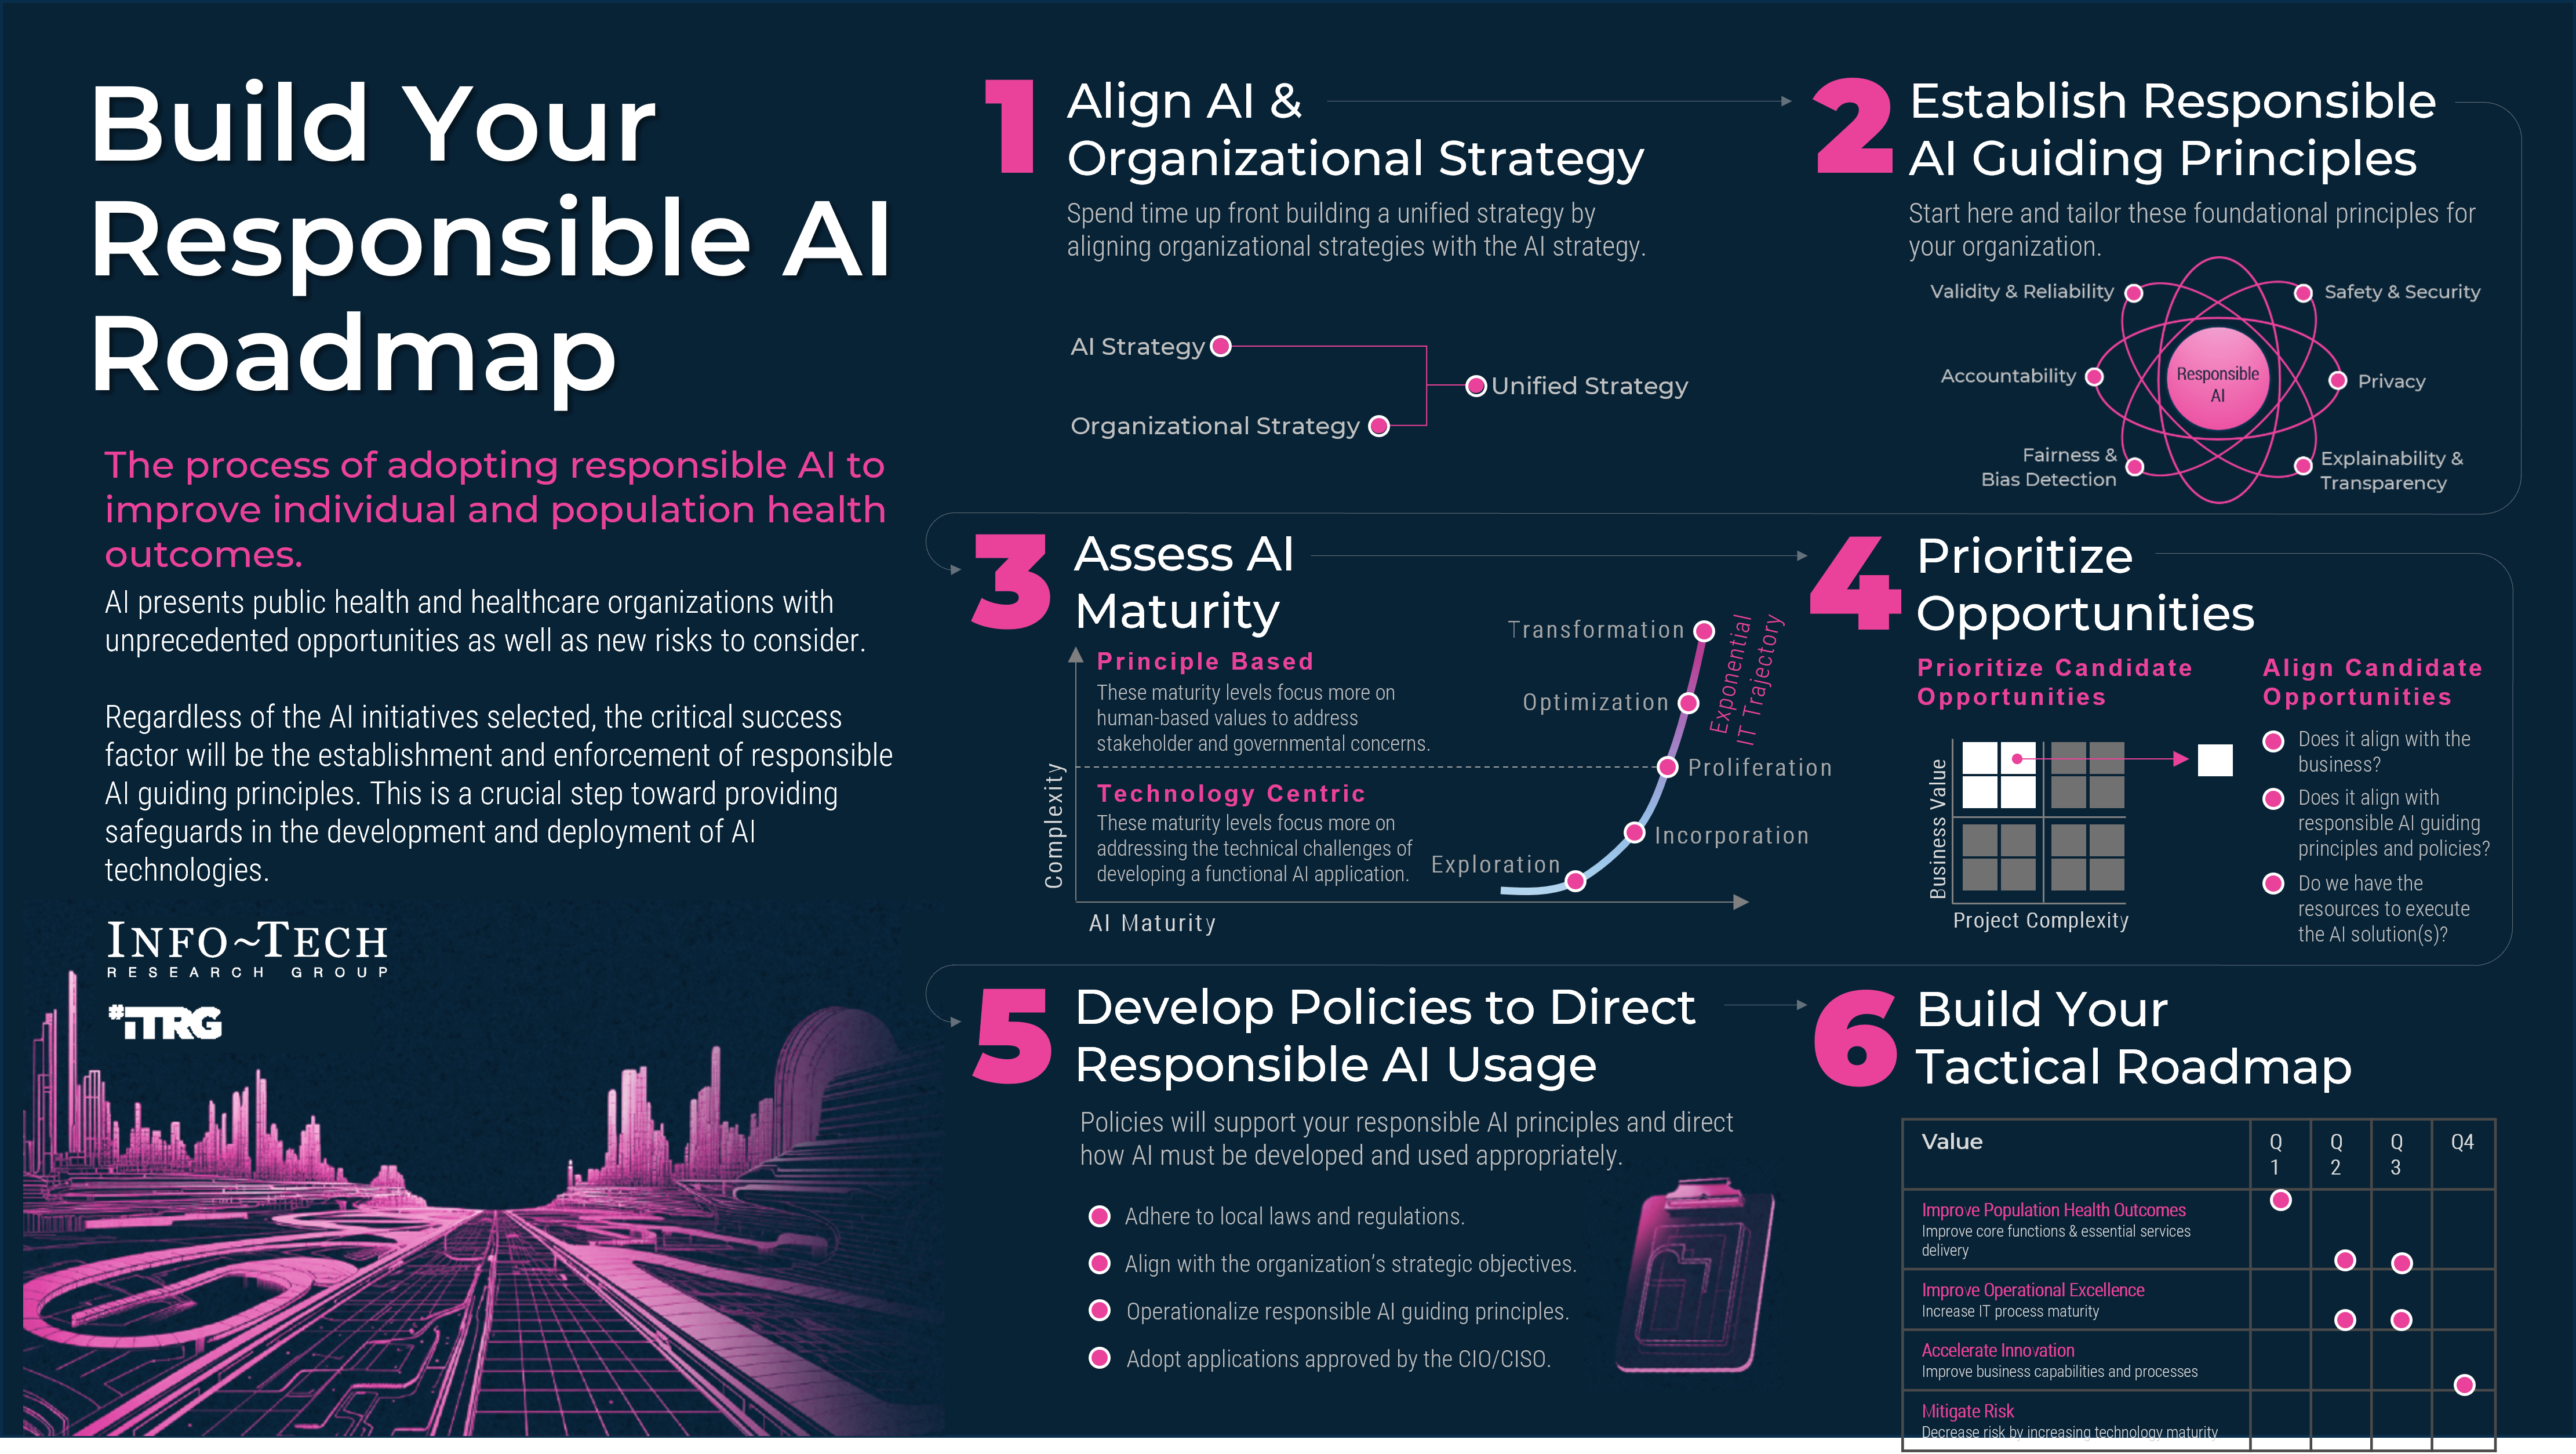 The image contains a screenshot of the thought model on Build Your Responsible AI Roadmap.